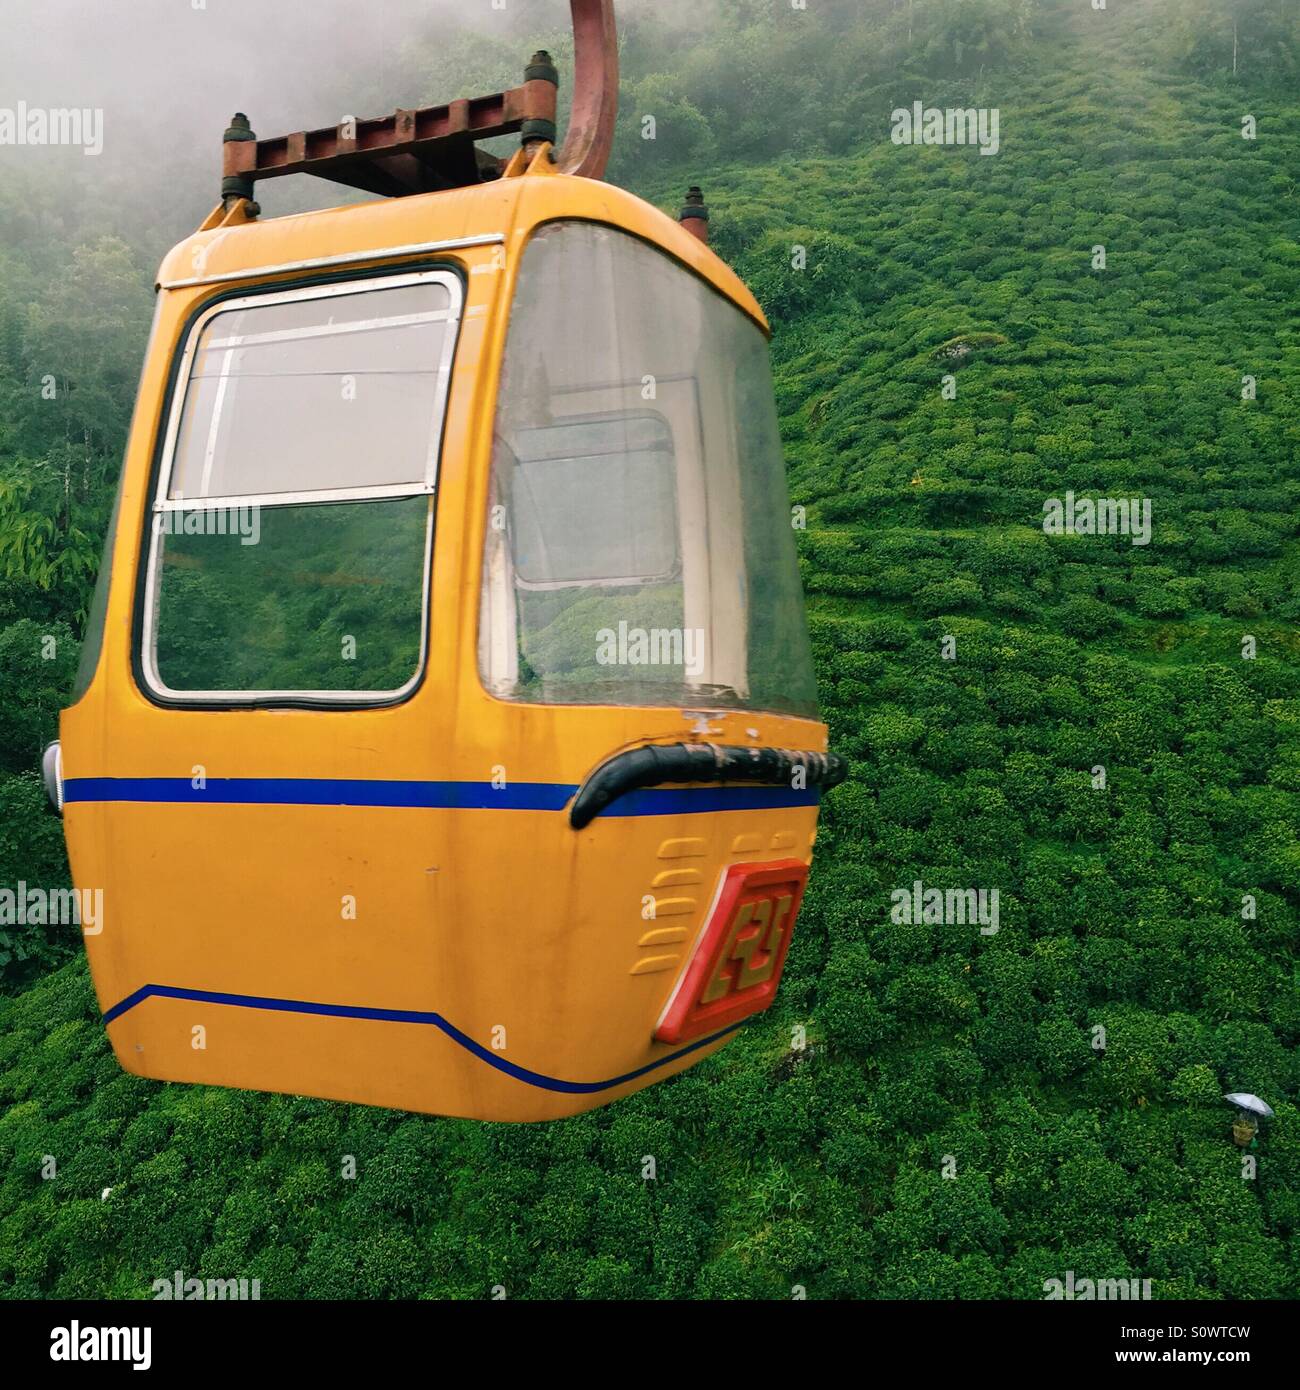 Darjeeling ropeway: A cable car passing by on the ropeway above Darjeeling tea garden. Stock Photo